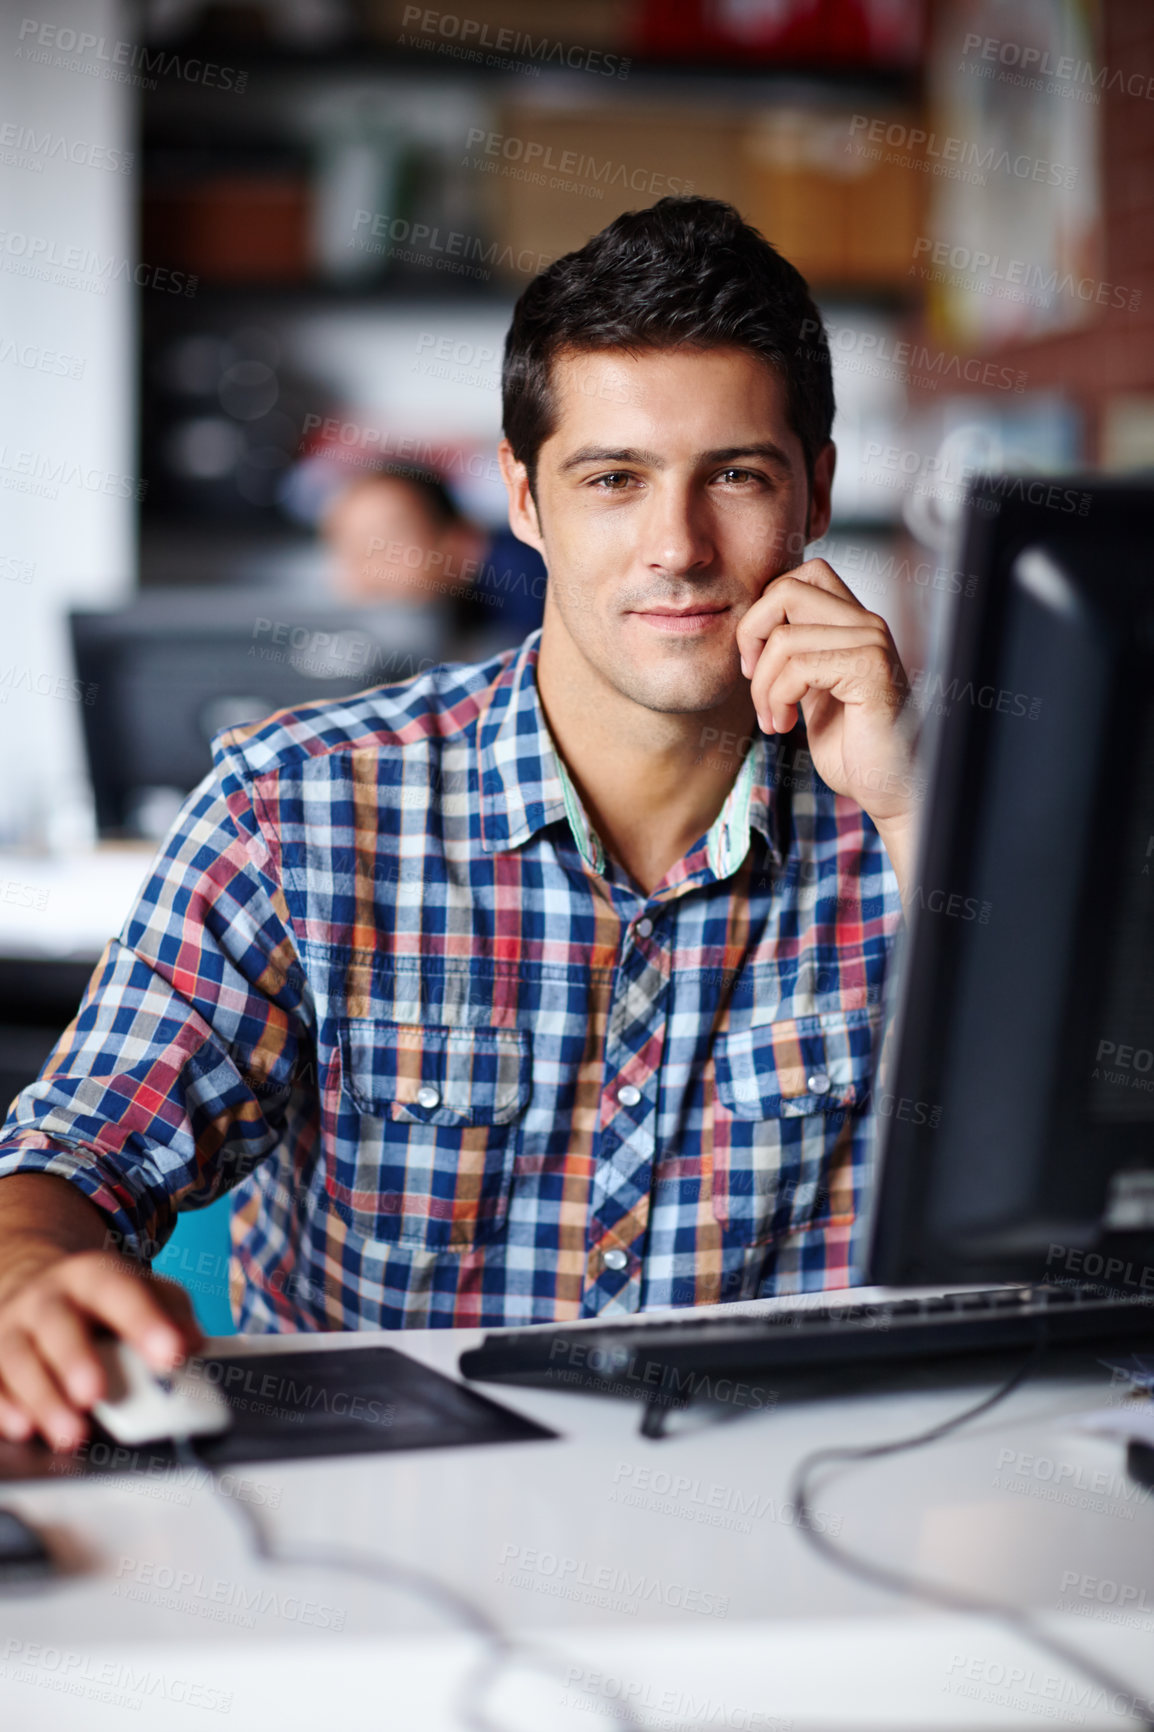 Buy stock photo Portrait of a handsome young designer sitting at his desk in the office